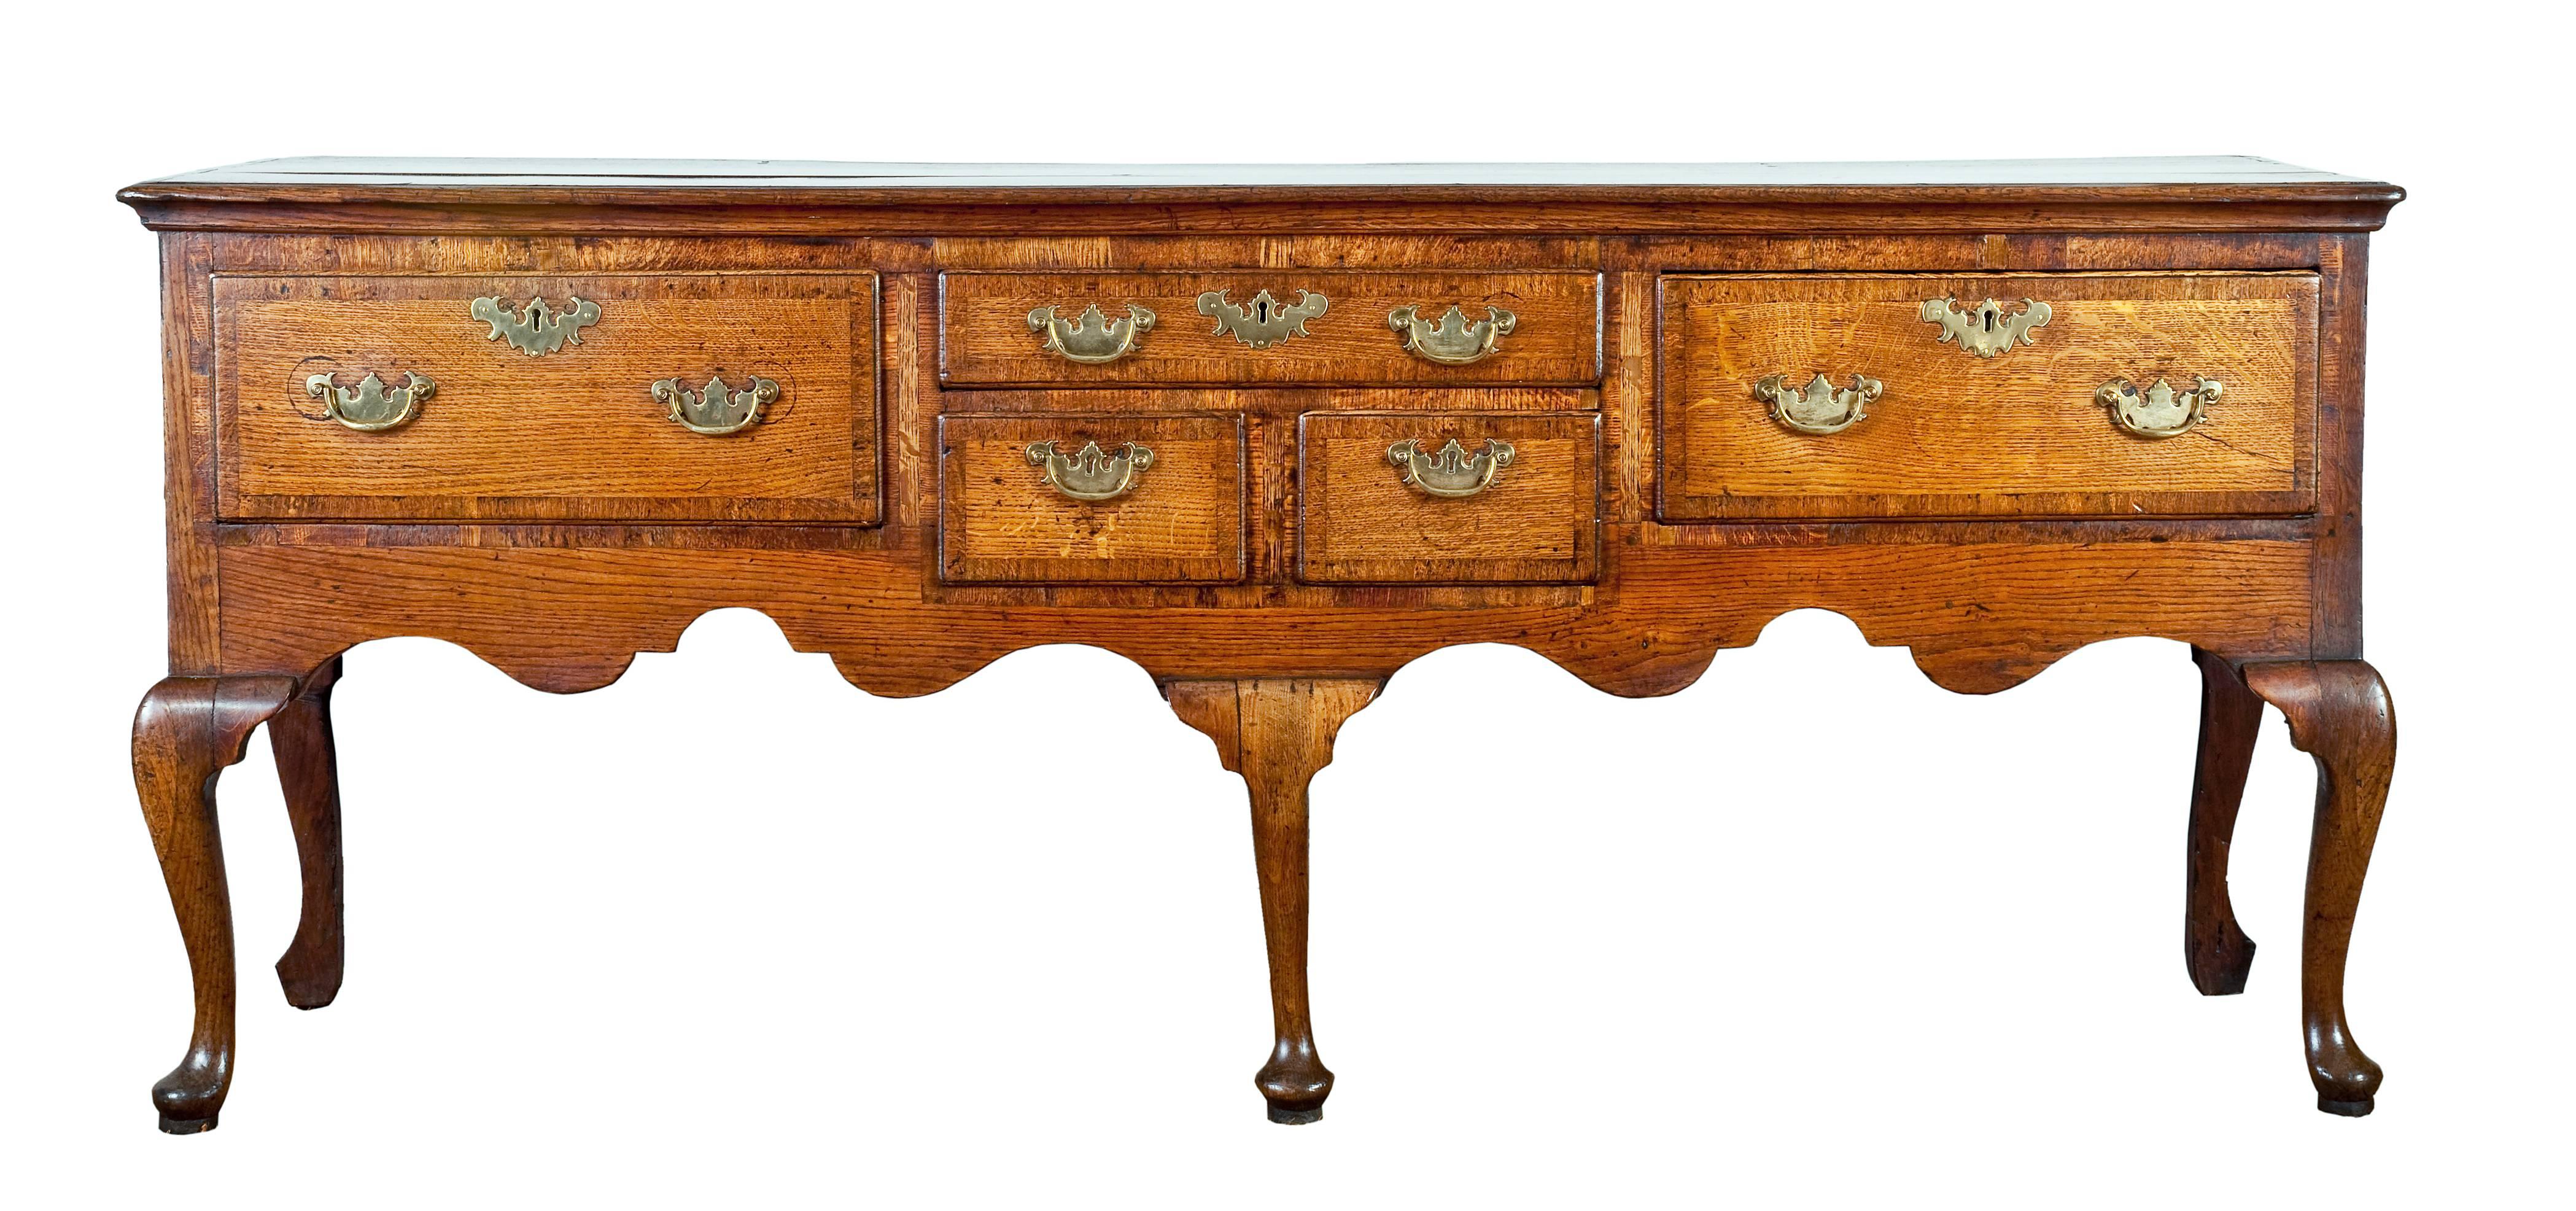 An 18th century English oak dresser base - UK1788.

Having a boarded crossbanded top above a shallow central drawer above two short drawers, flanked by two deep drawers, all crossbanded. With a shaped apron, raised on five attractive cabriole legs